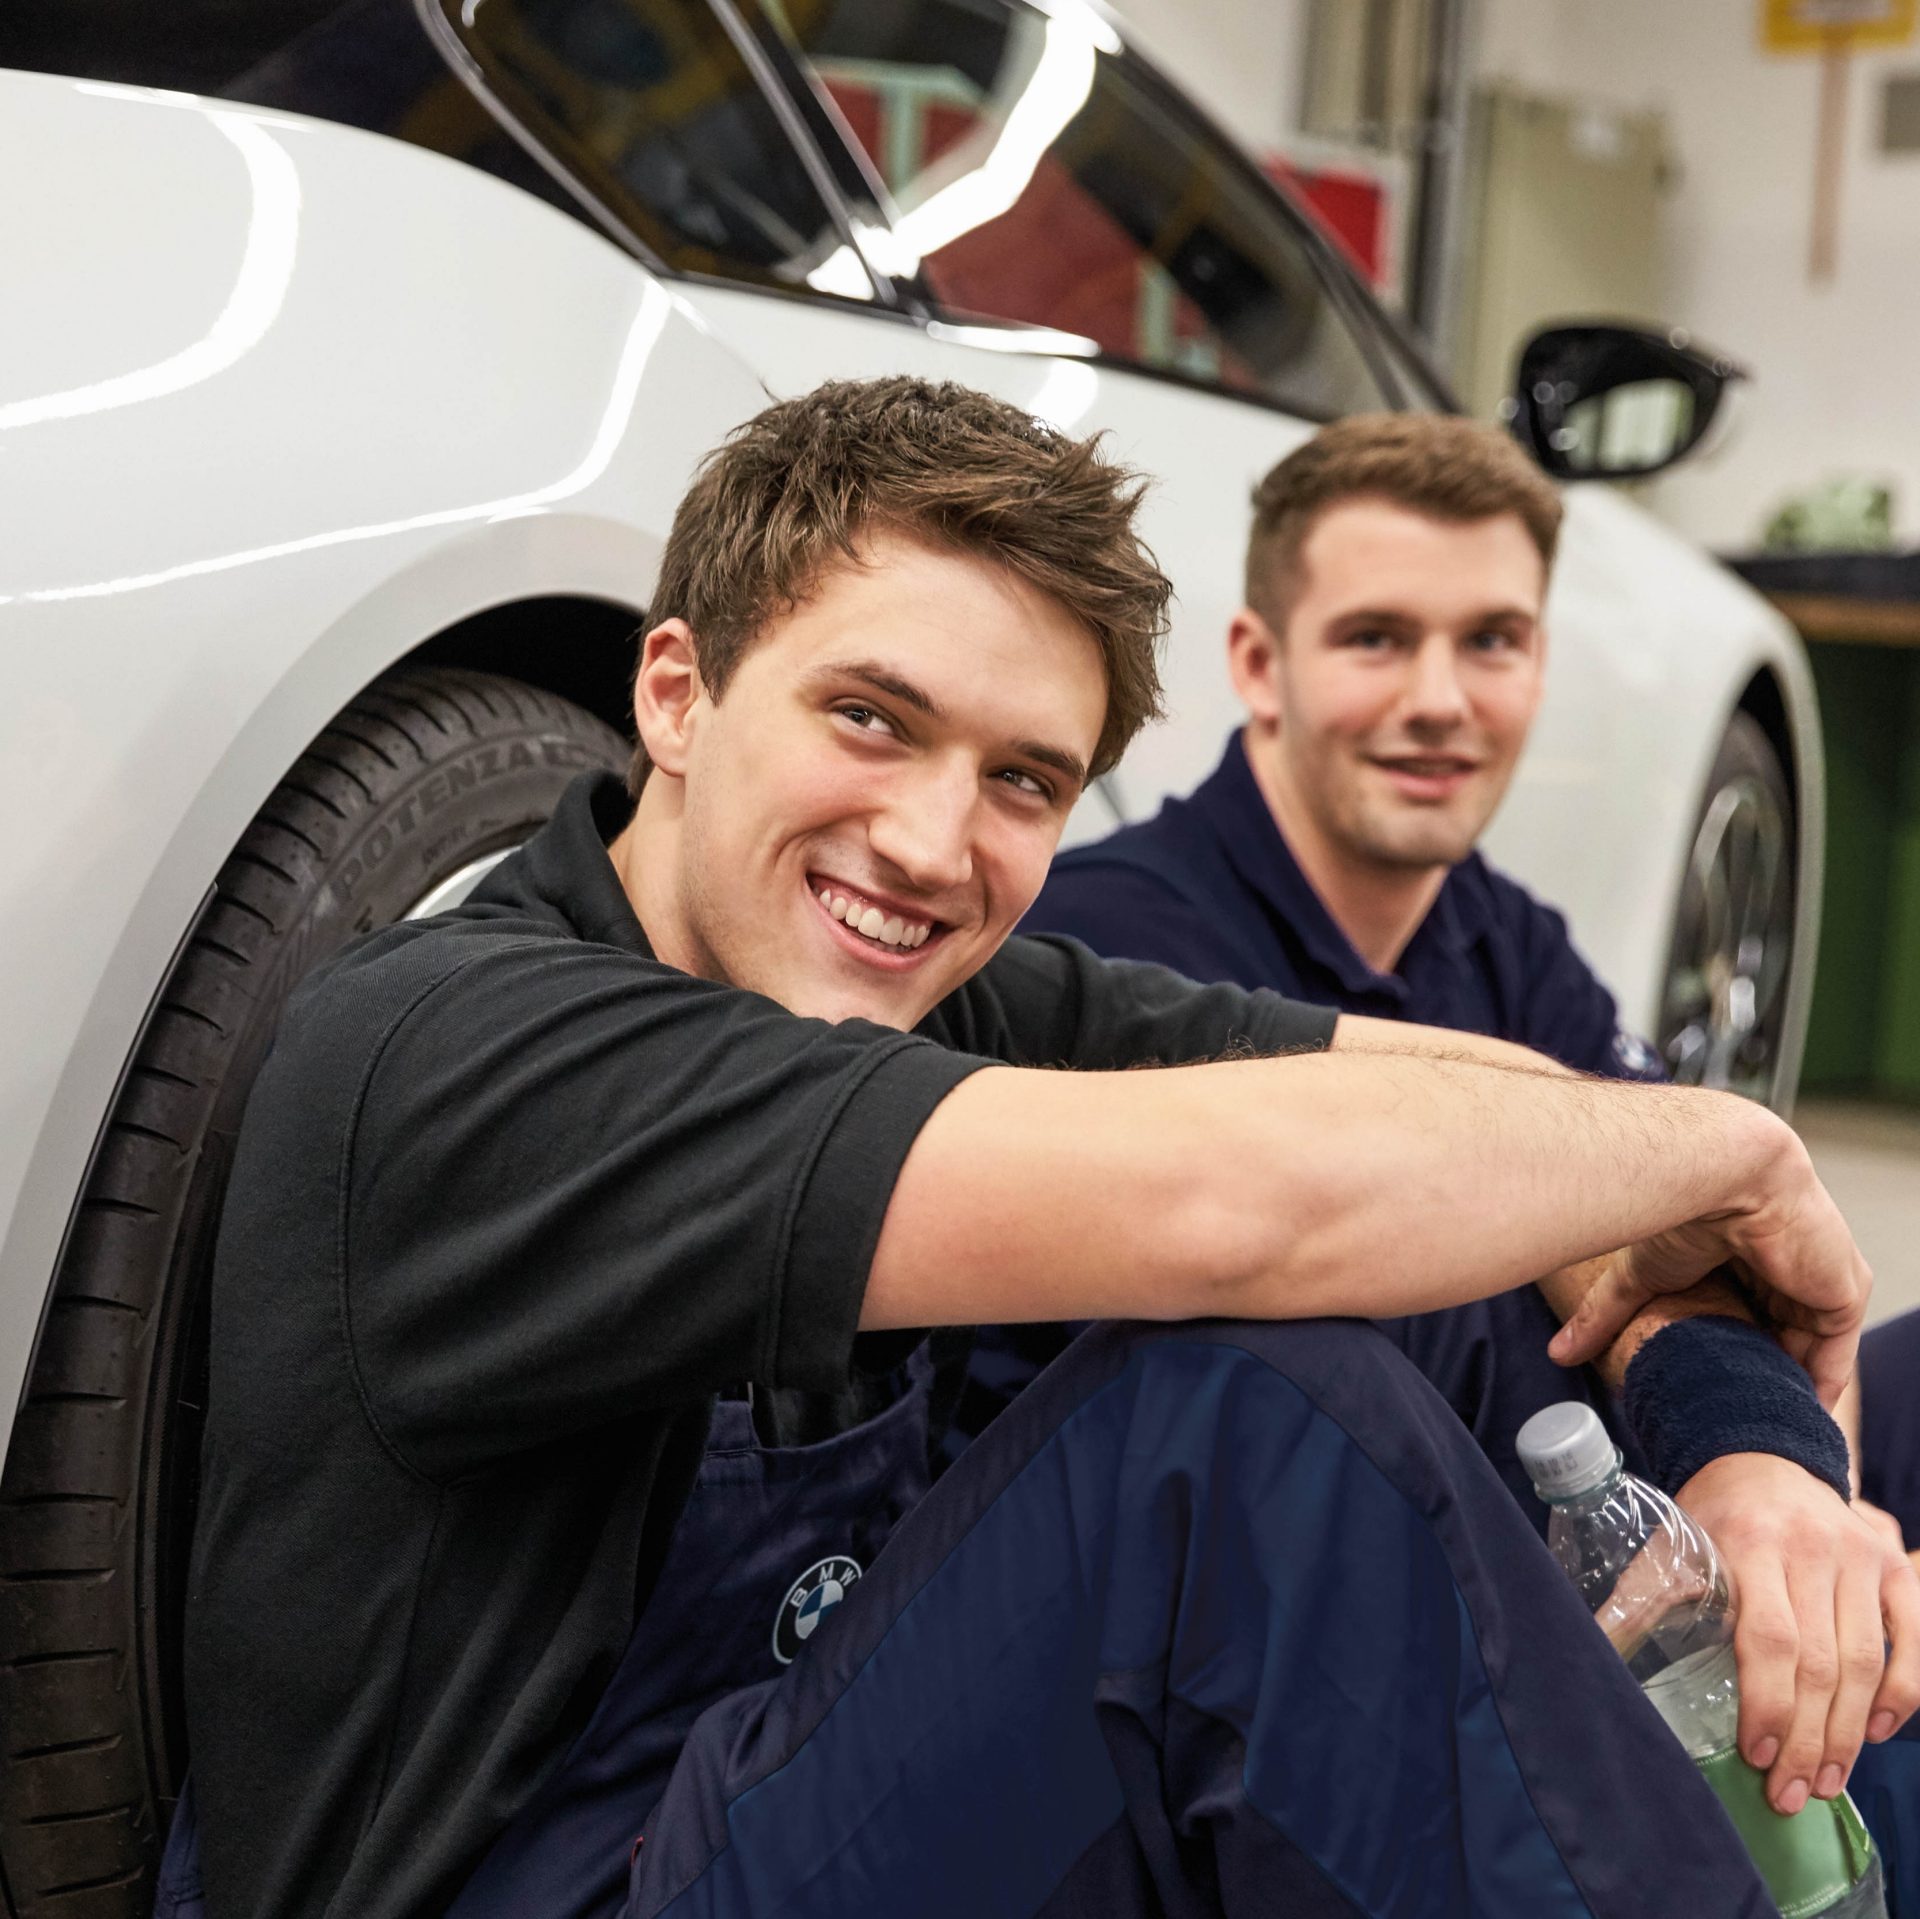 The picture shows two BMW apprentices who sit next to a car.